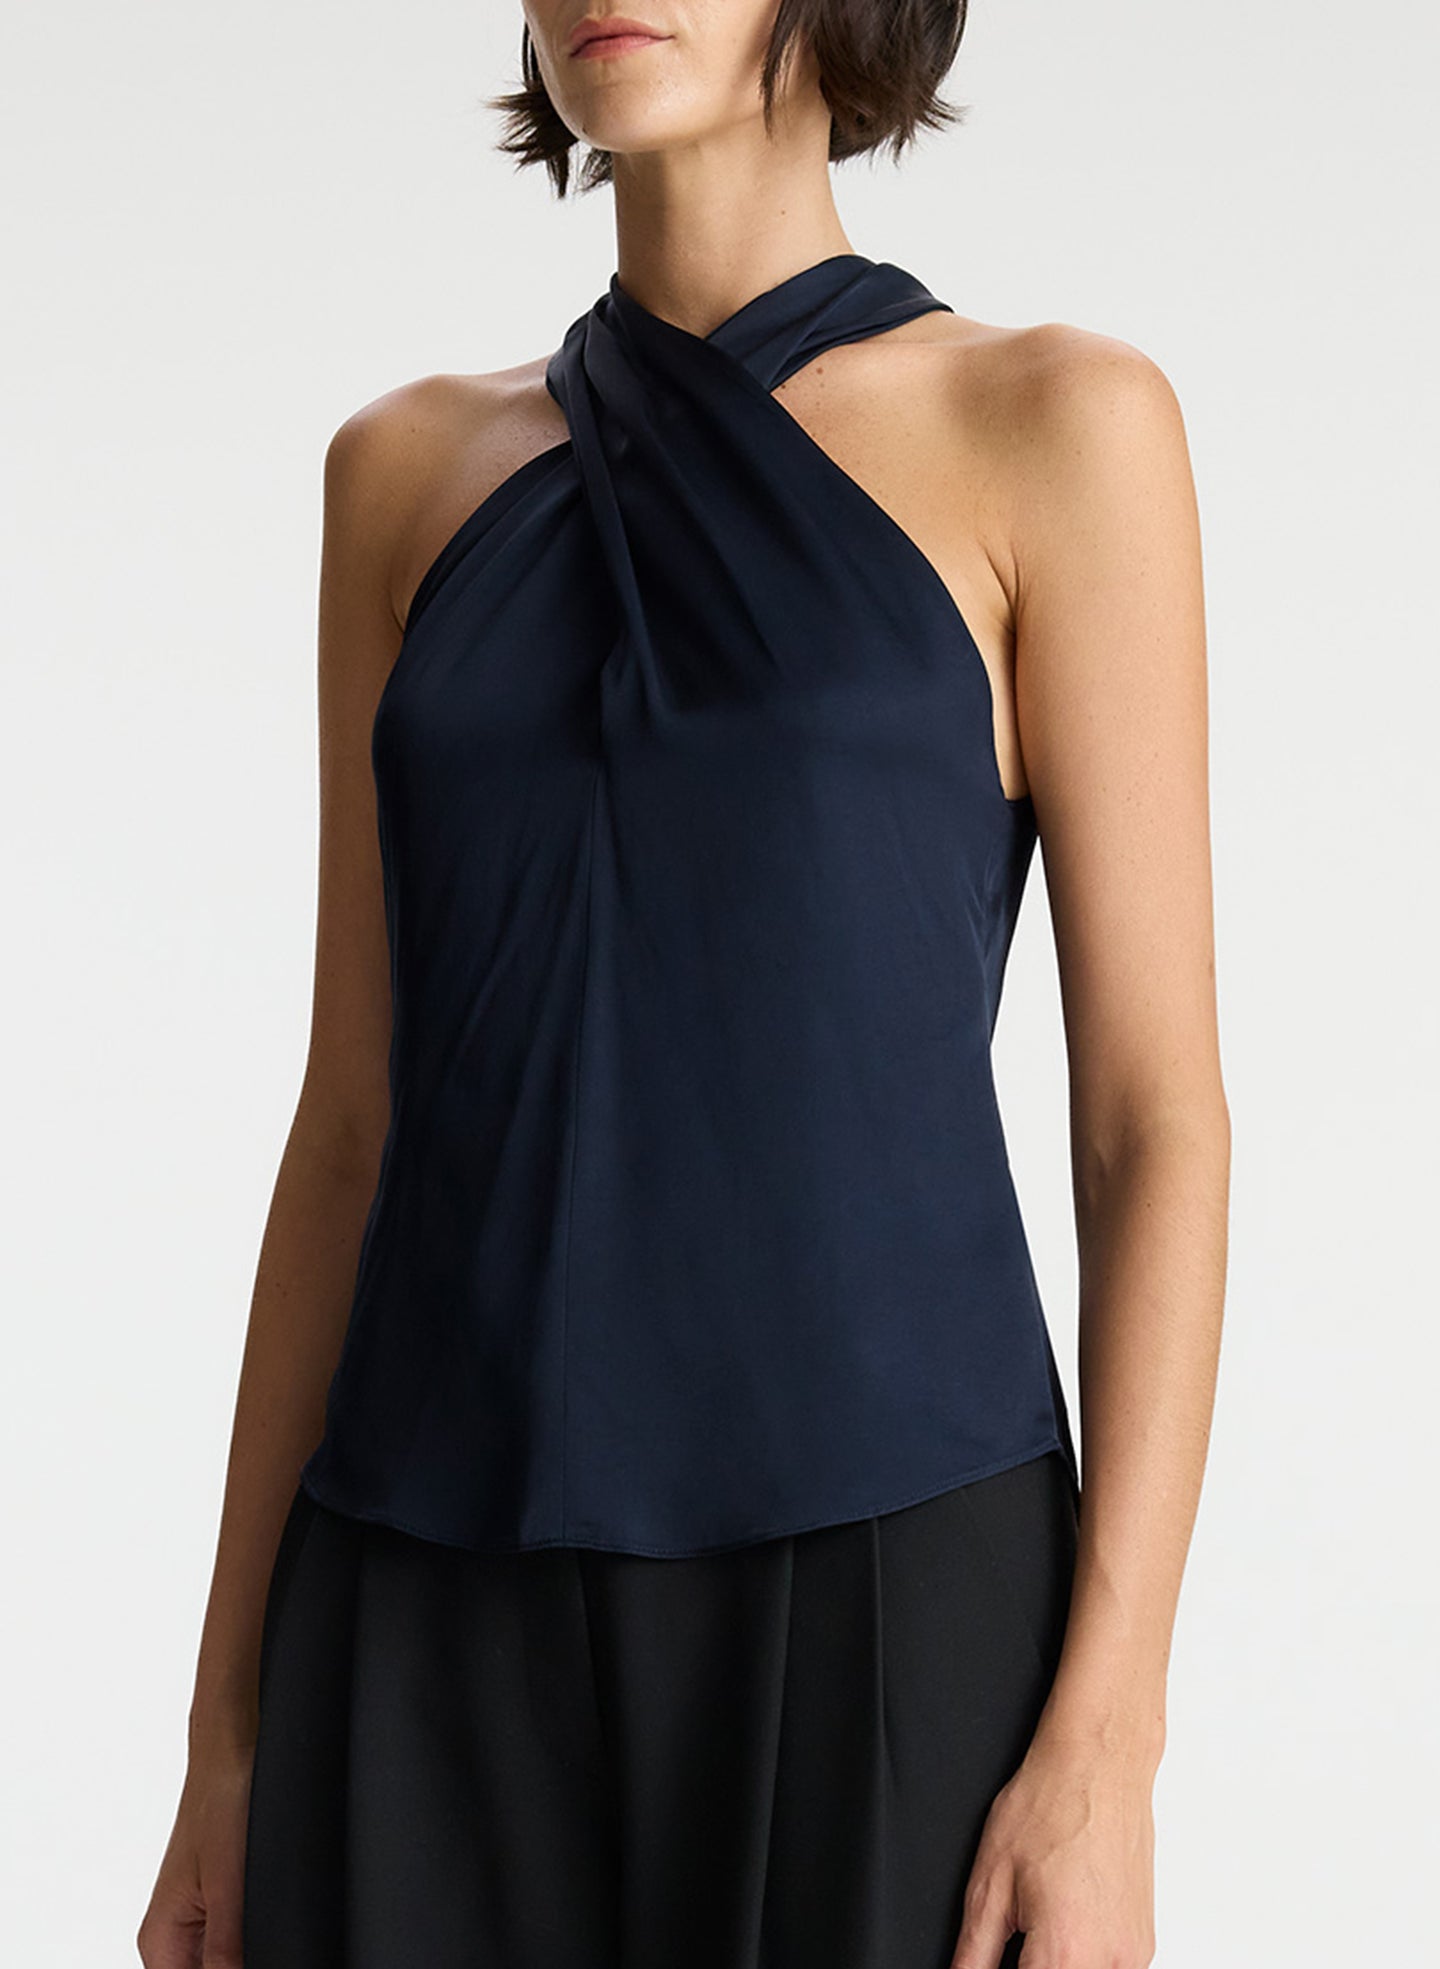 detail view of woman wearing navy blue satin halter top with black pants